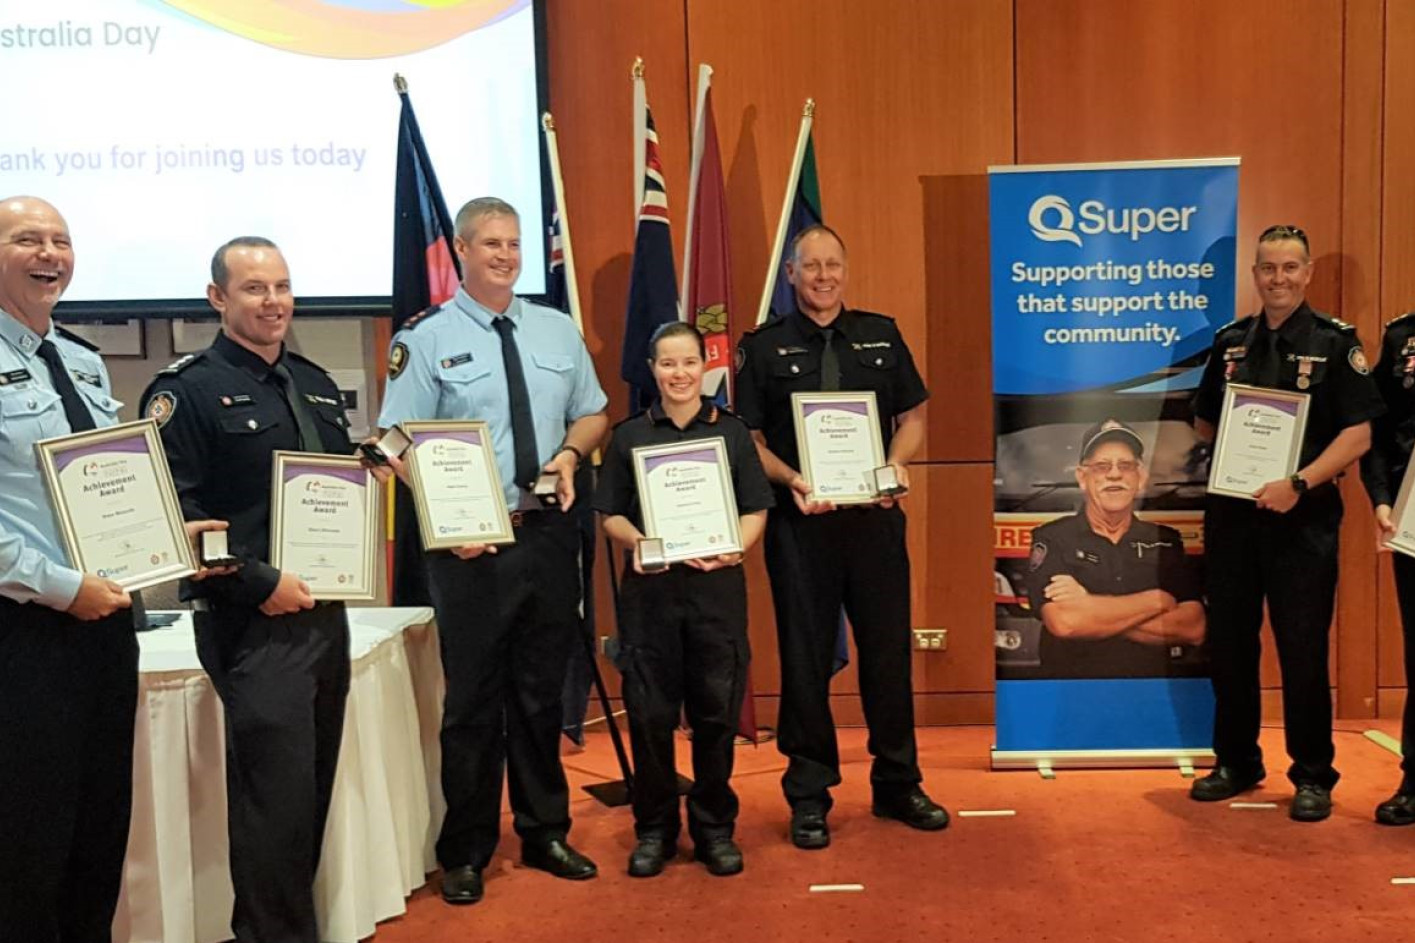 Fire and Emergency Services award recipients Peter Rinaudo, Clint L’Estrange, Matthew Currey, Suzanne Cray, Andrew Petrack, Jason Ryan and Bradley Fleming. Absent from photo: Scott Templeton.